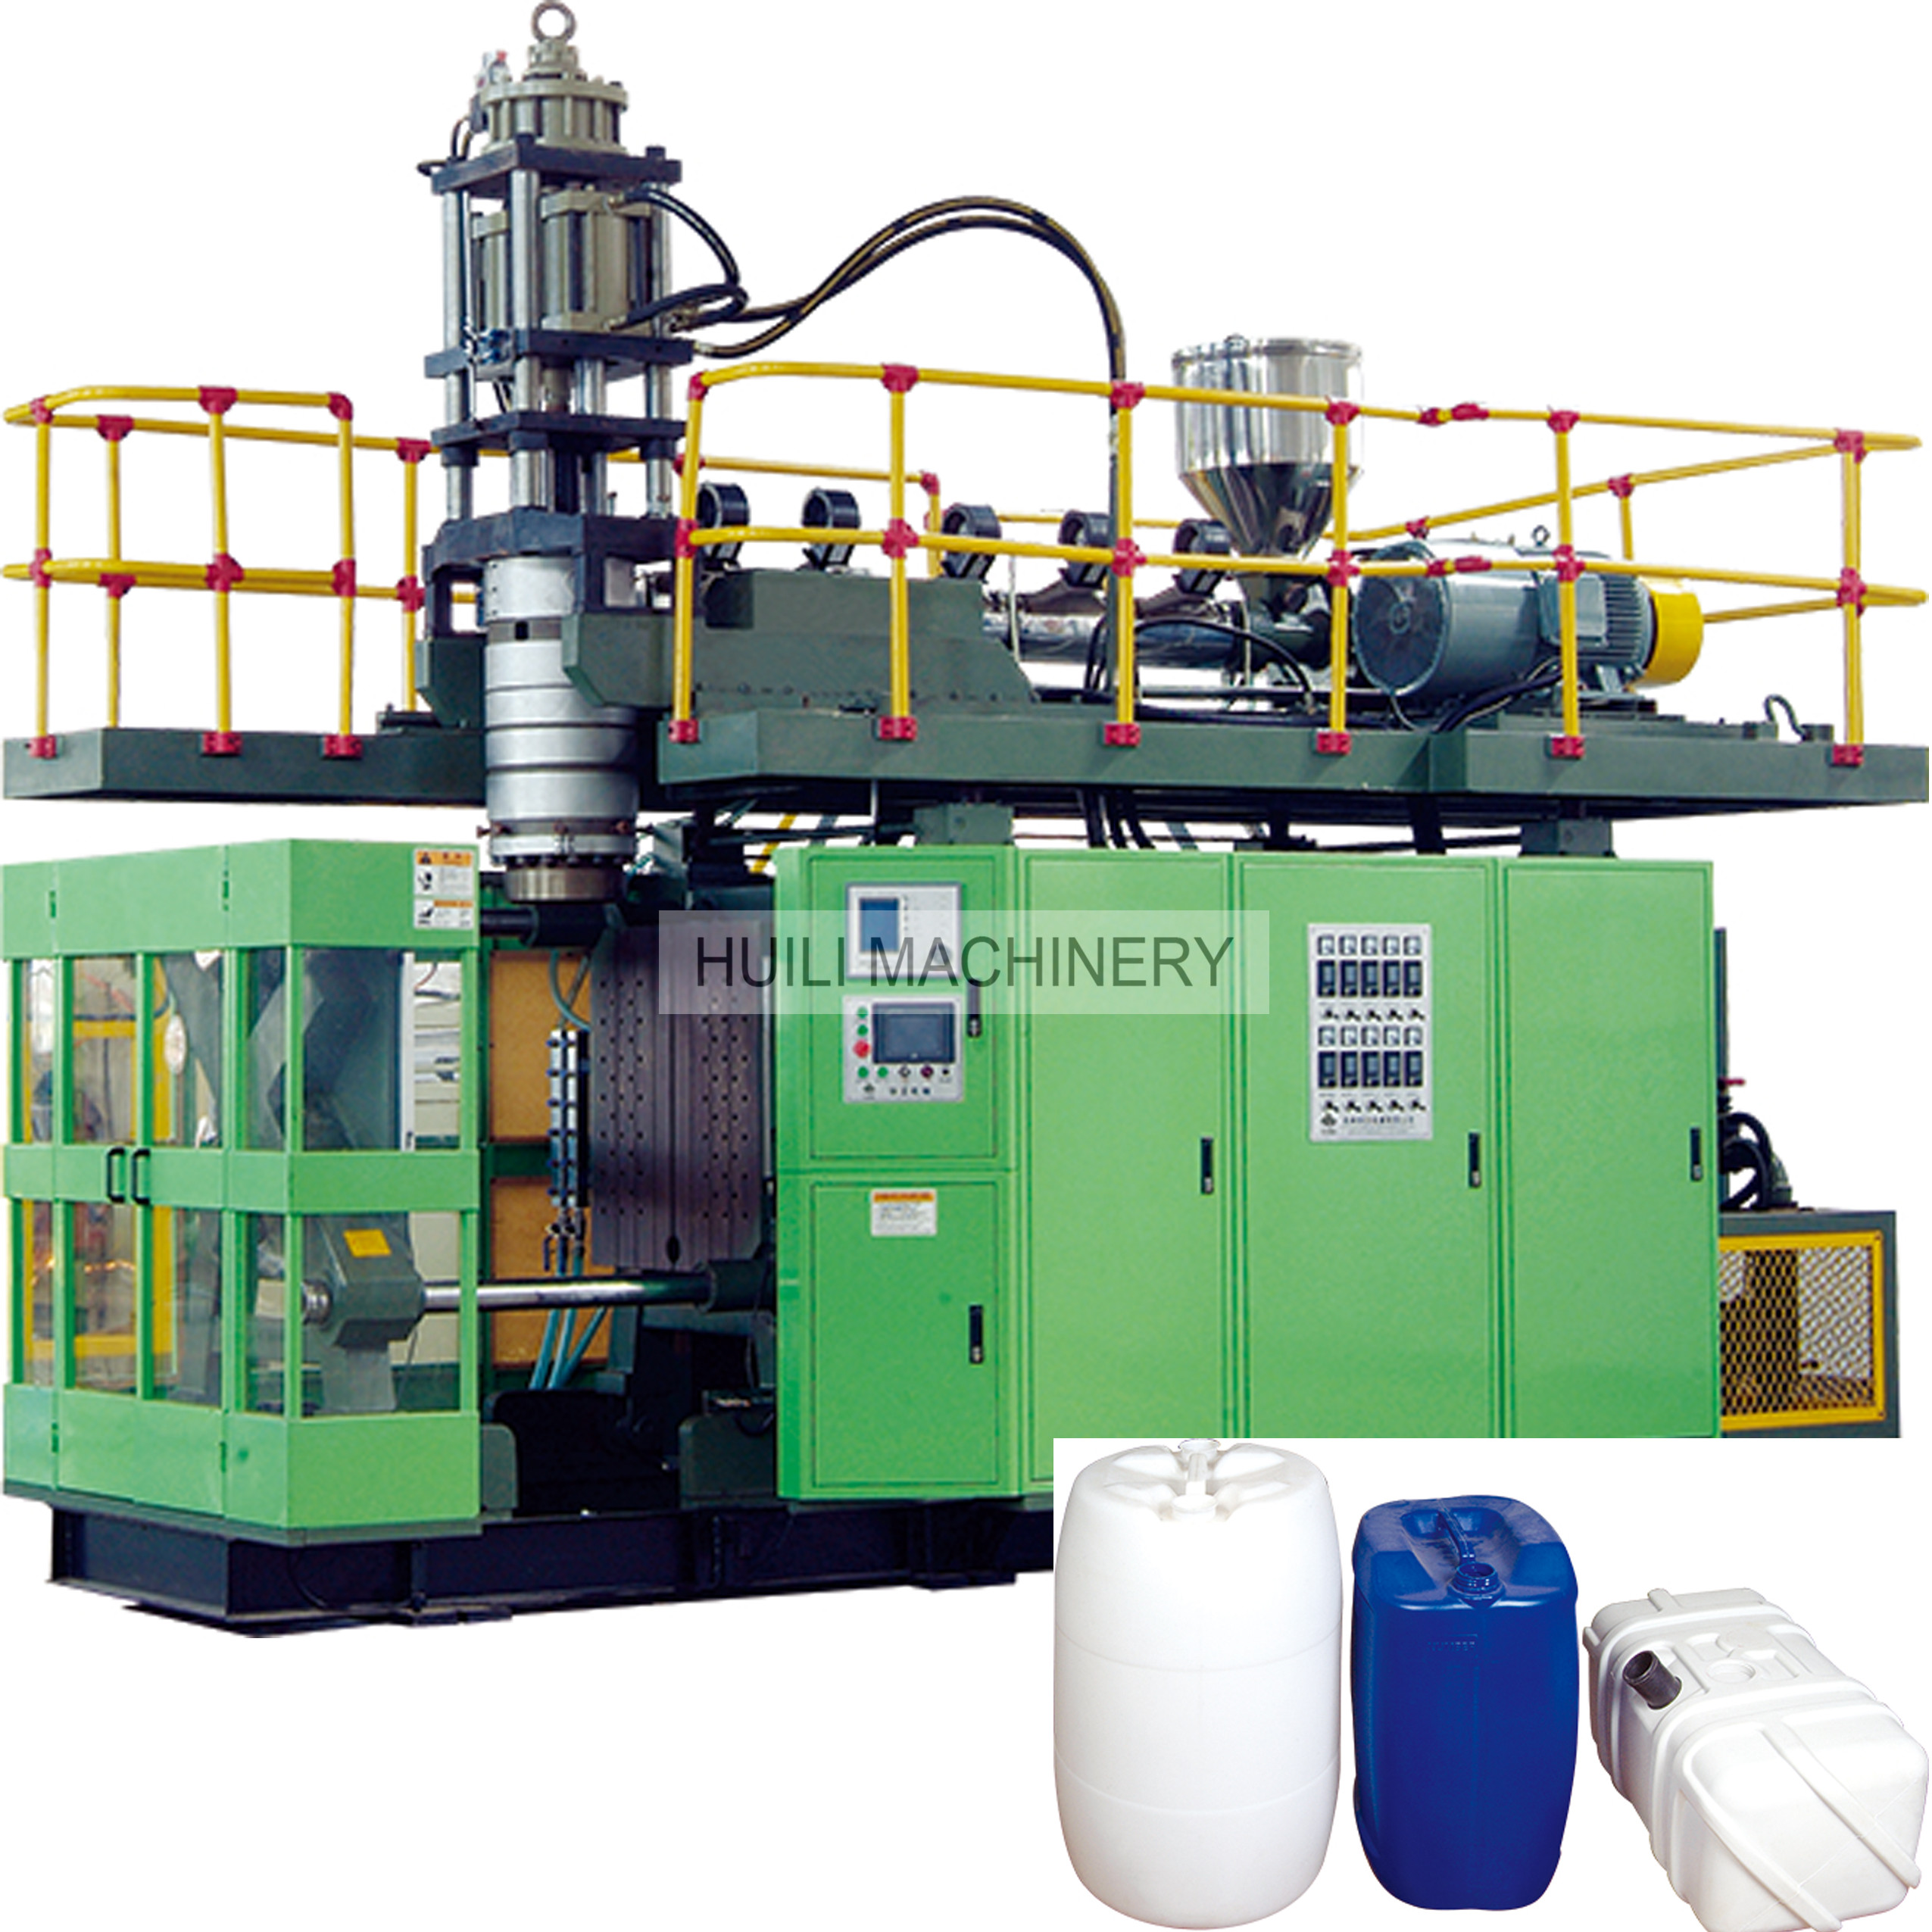 Full Automatic Extrusion Blow Machine For 10 -30liter Big Drum And Bottles Mould Blowing Machine